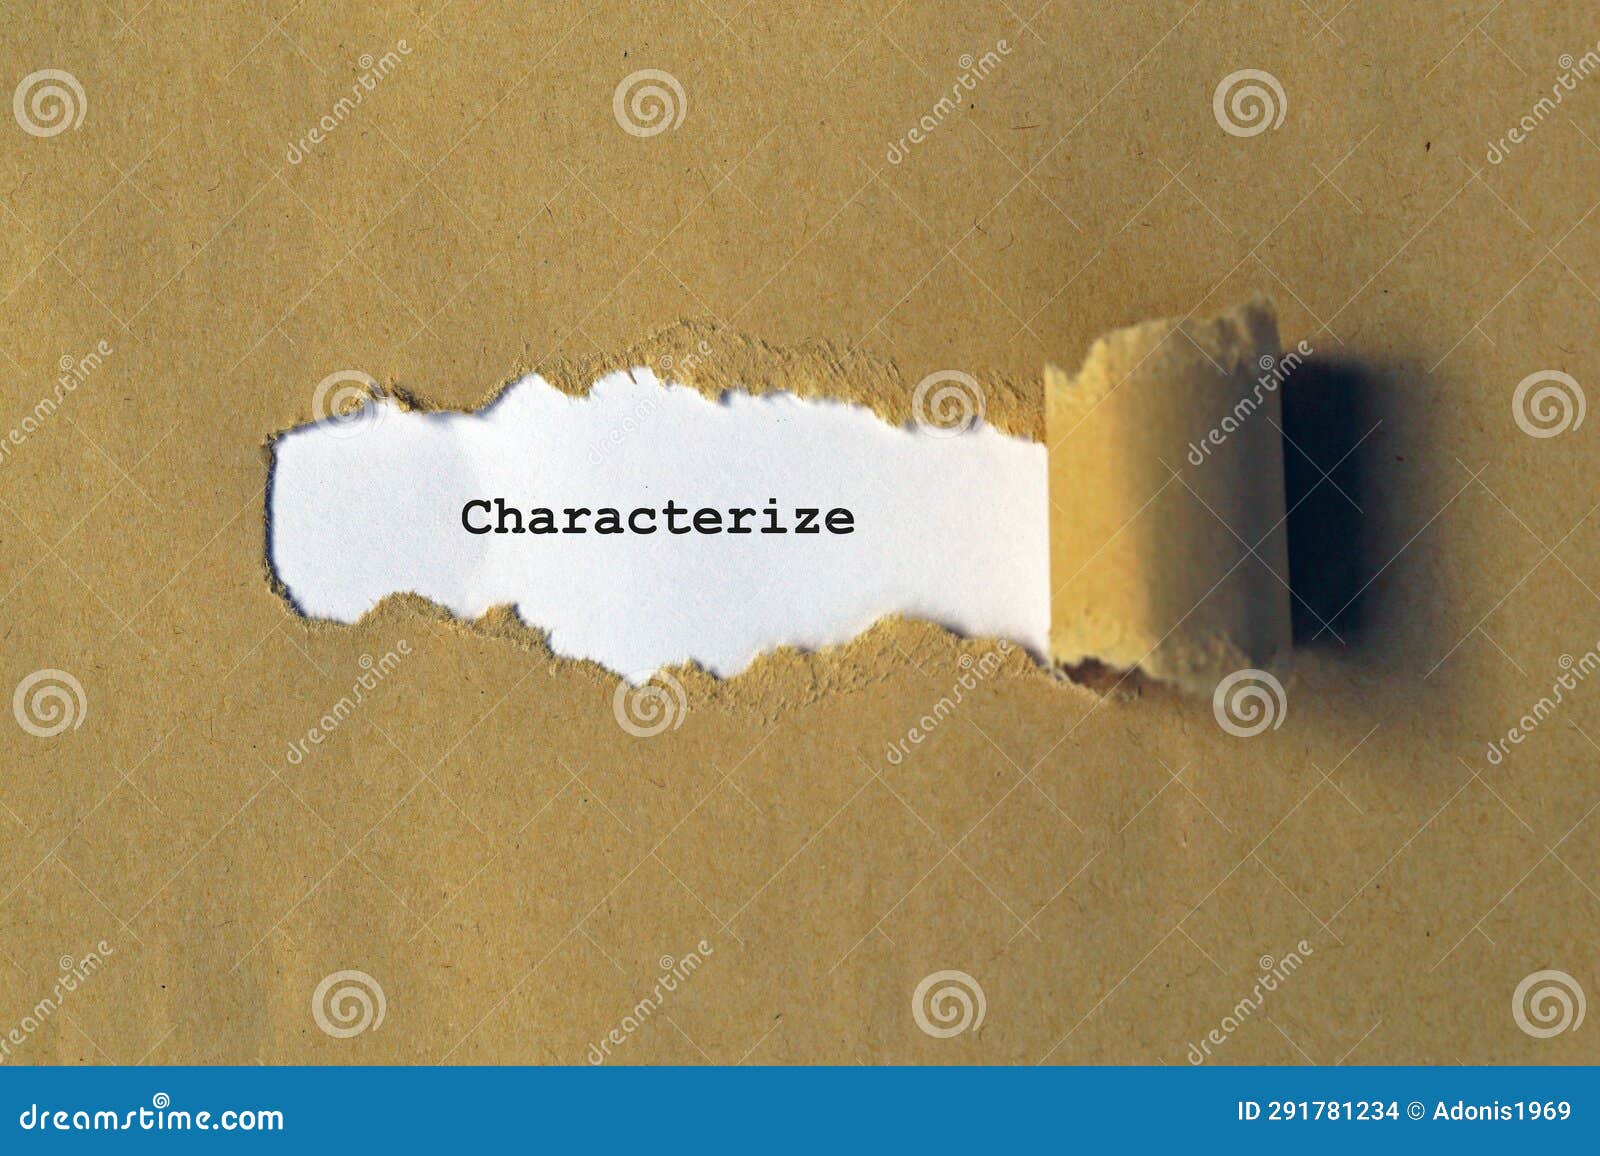 characterize on white paper